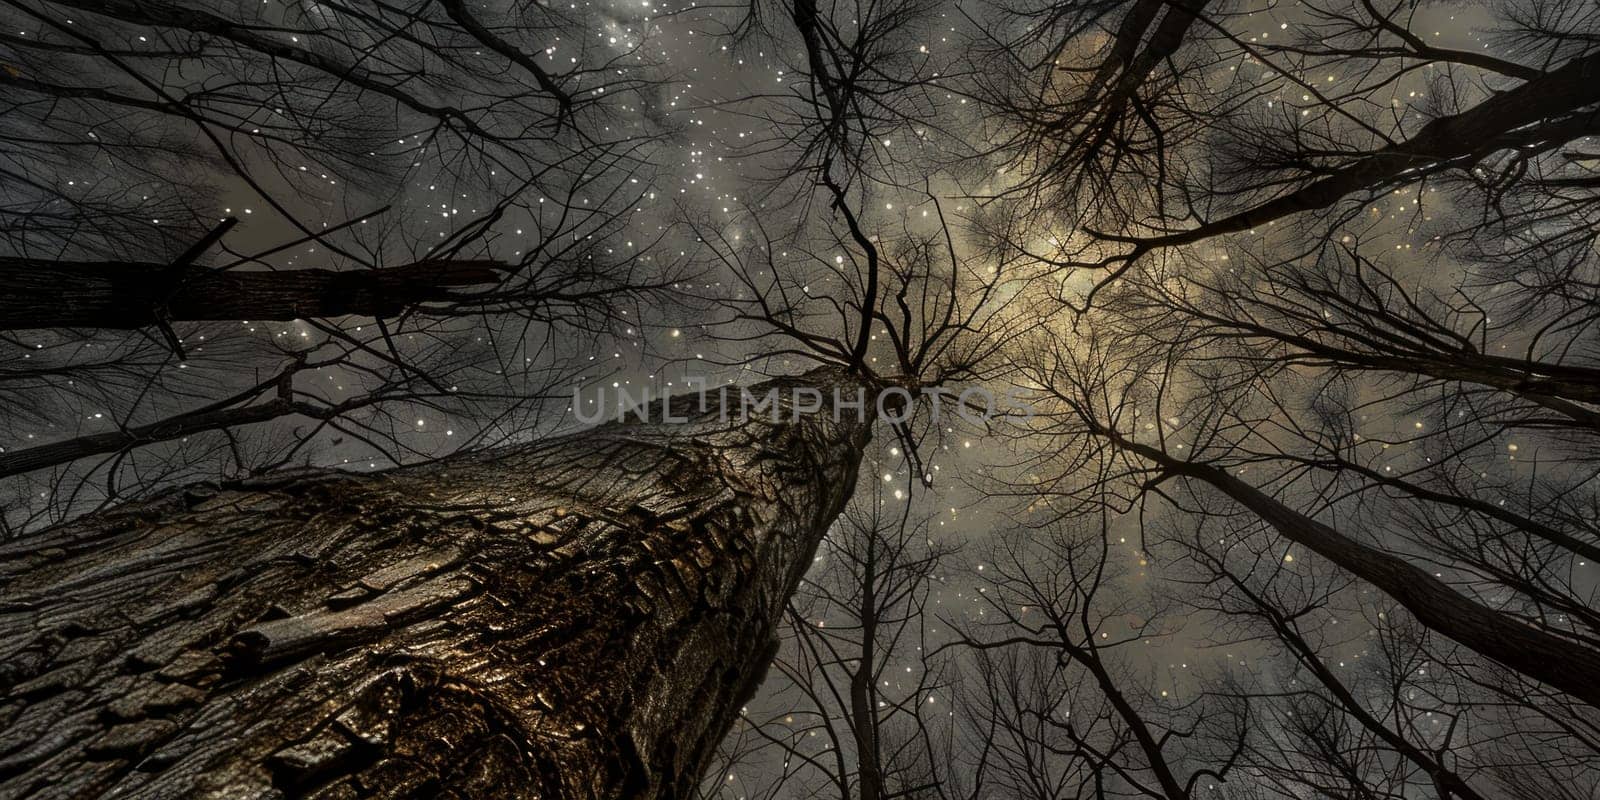 Gazing up at the shimmering stars twinkling in the vast night sky, the branches of a lone tree reach towards the heavens in silent wonder.